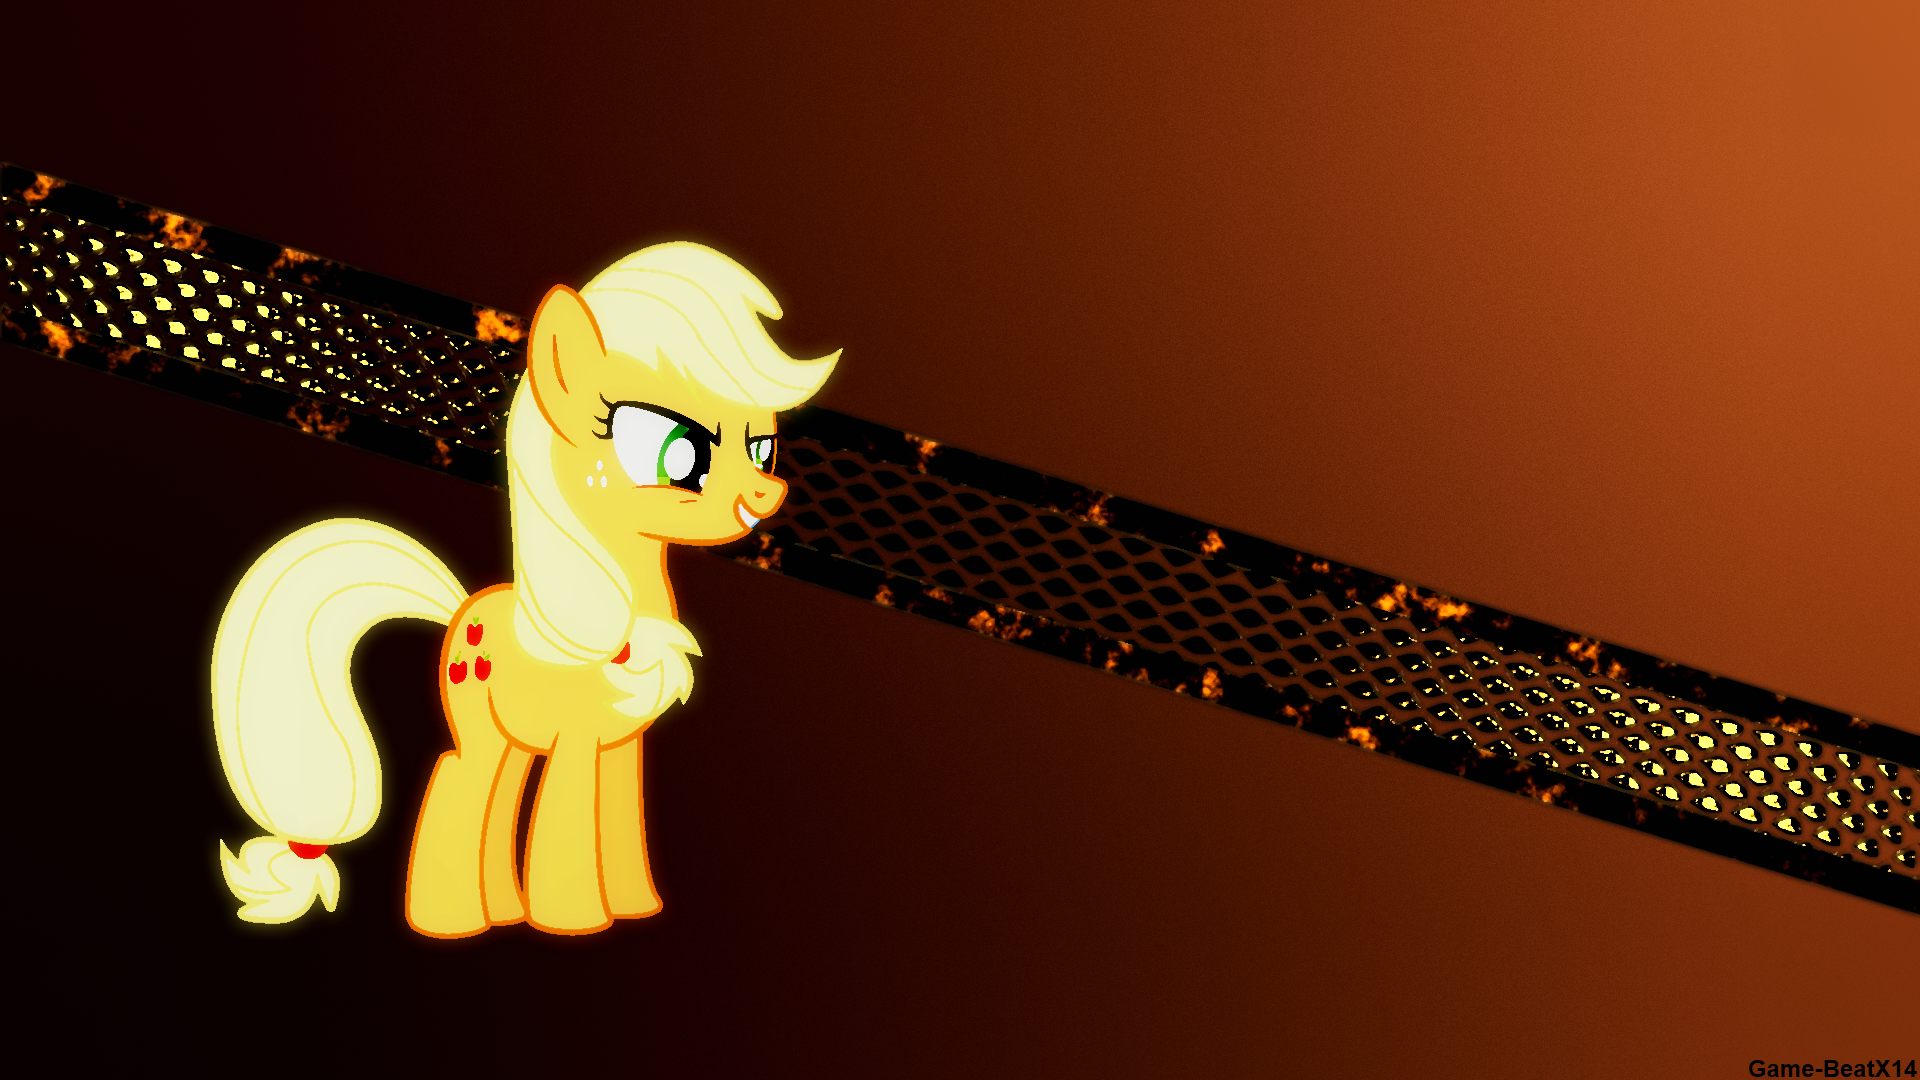 Applejack Wallpaper 2 by Game-BeatX14 and thehellbean